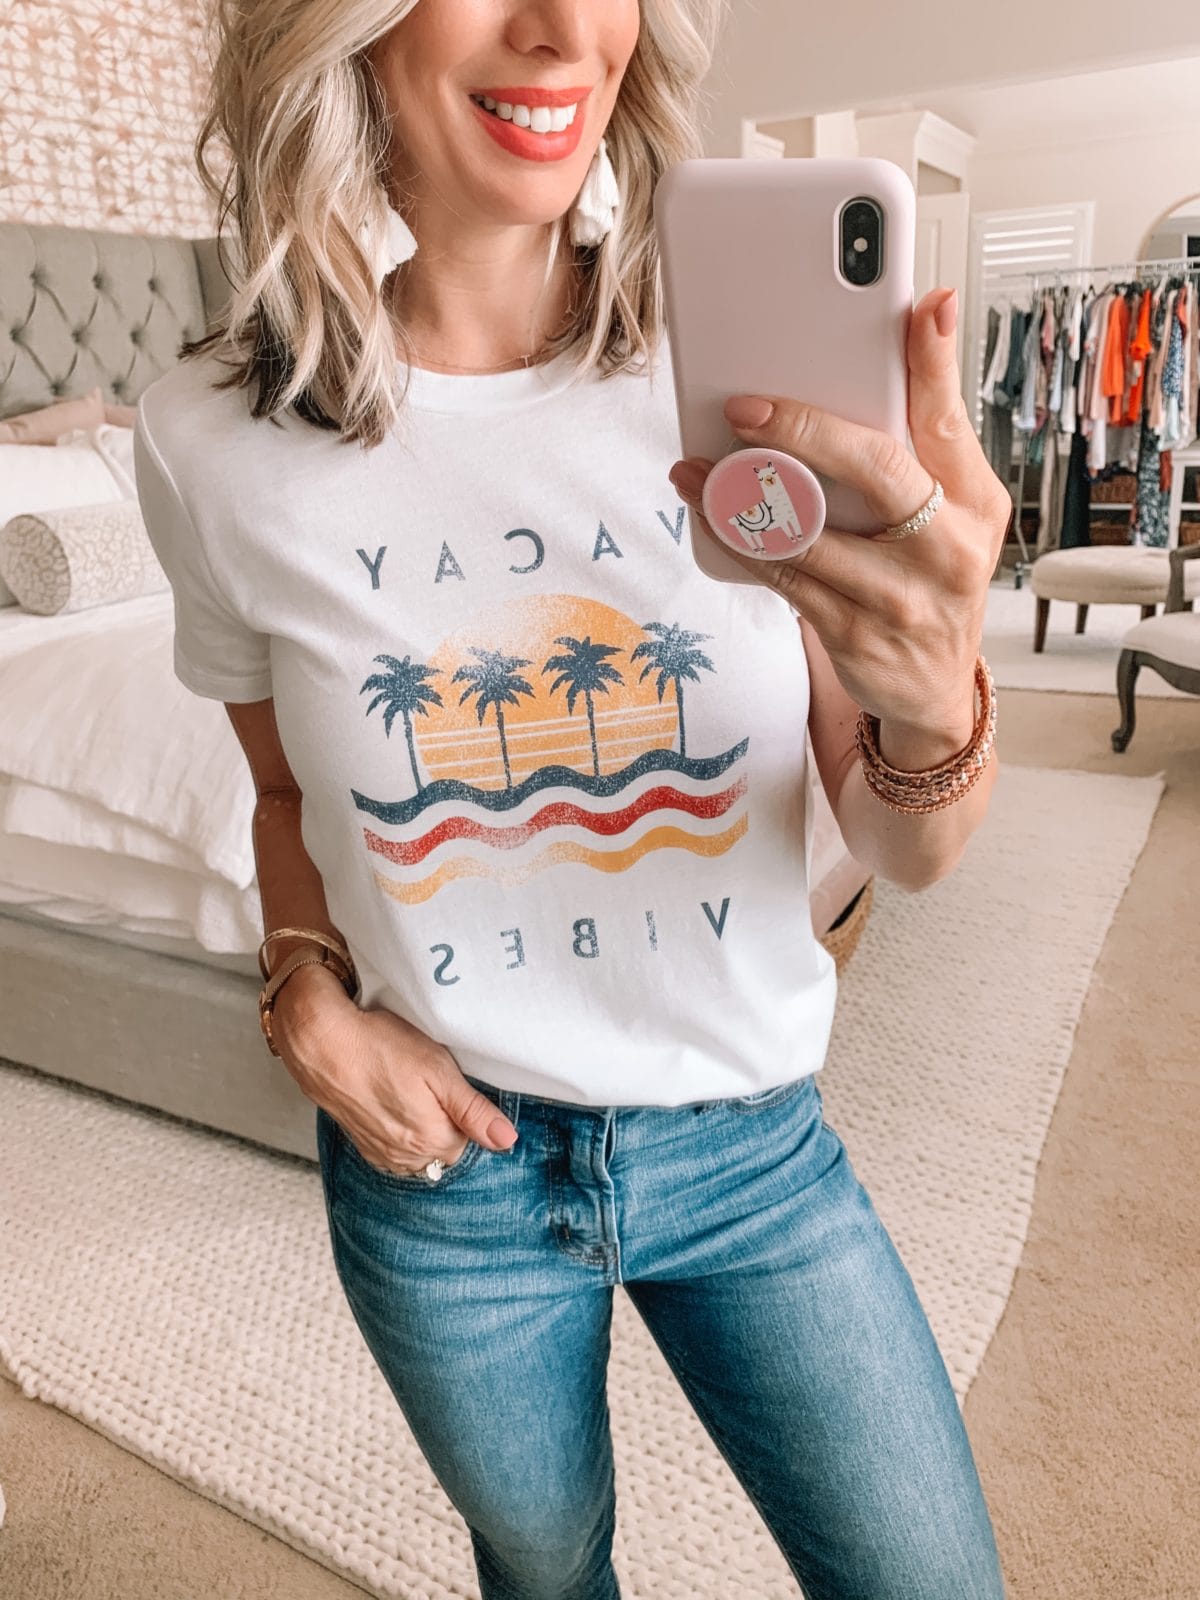 Dressing Room Finds Nordstrom & LOFT, Vacay Tee, Skinny Jeans 